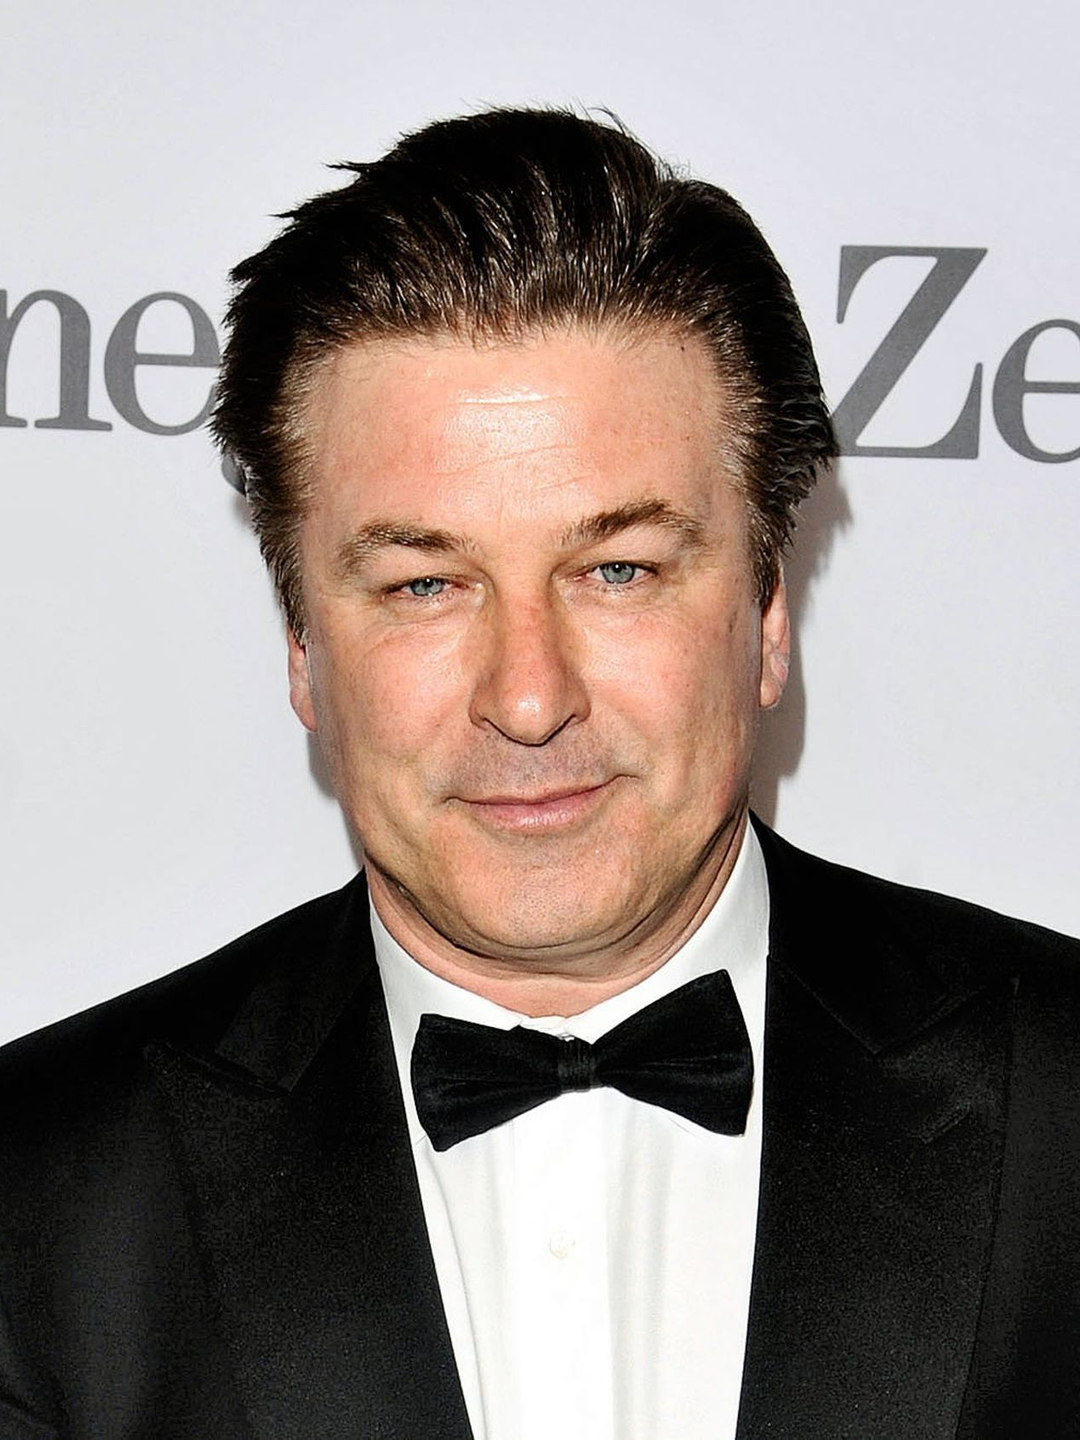 Alec Baldwin in his youth